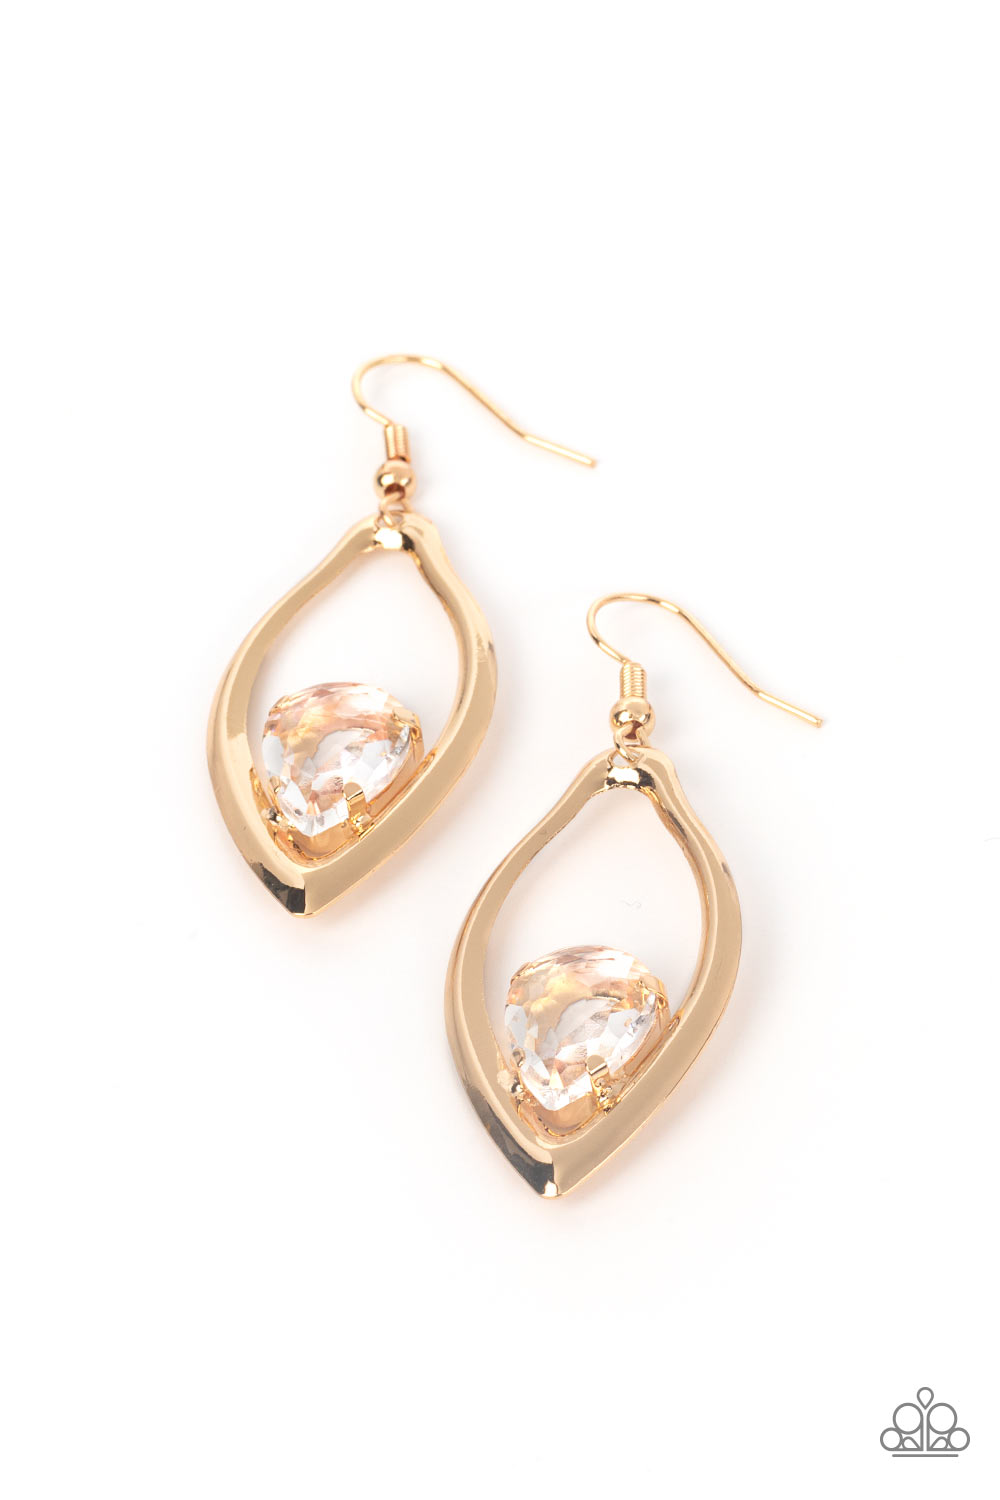 A golden teardrop gem is nestled inside the bottom of a warped gold frame, culminating into an edgy sparkle. Earring attaches to a standard fishhook fitting.